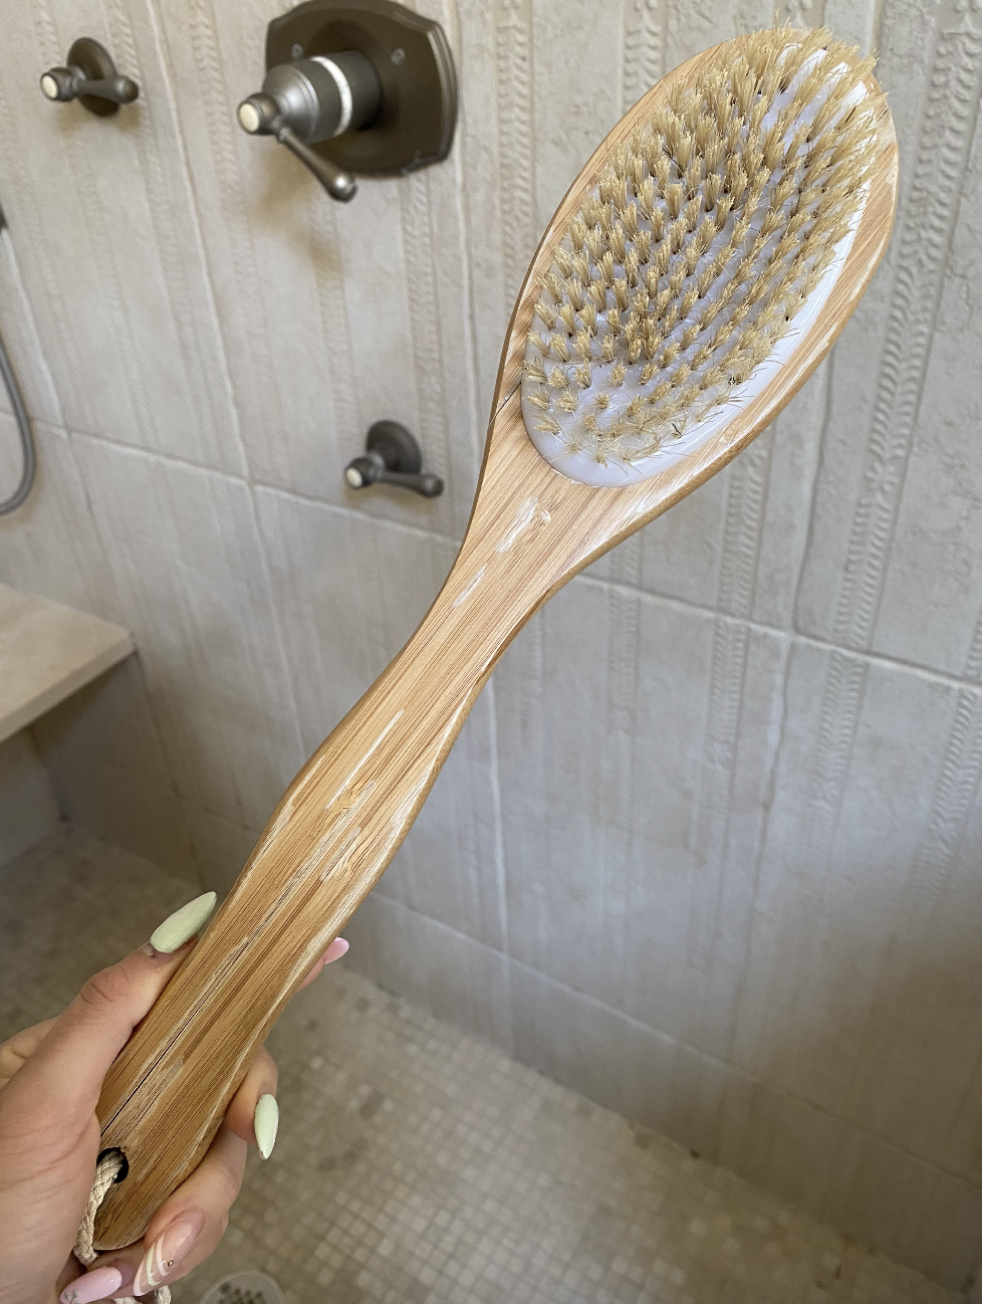 Hand holding a wooden bath brush with bristles, in front of a tiled shower wall